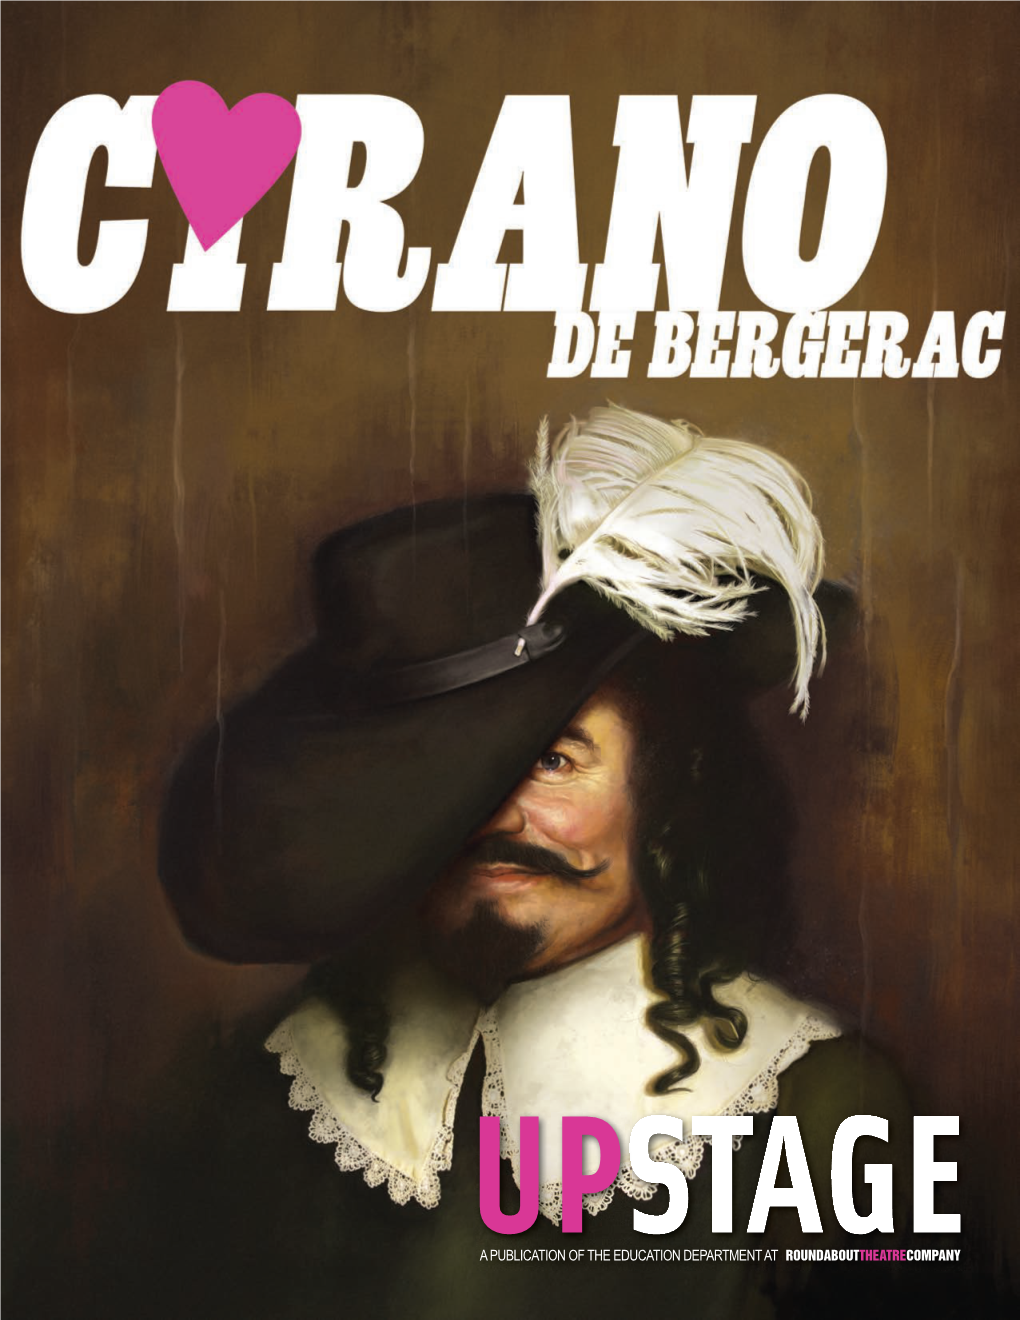 Cyrano De Bergerac Is Known for His Way with Words